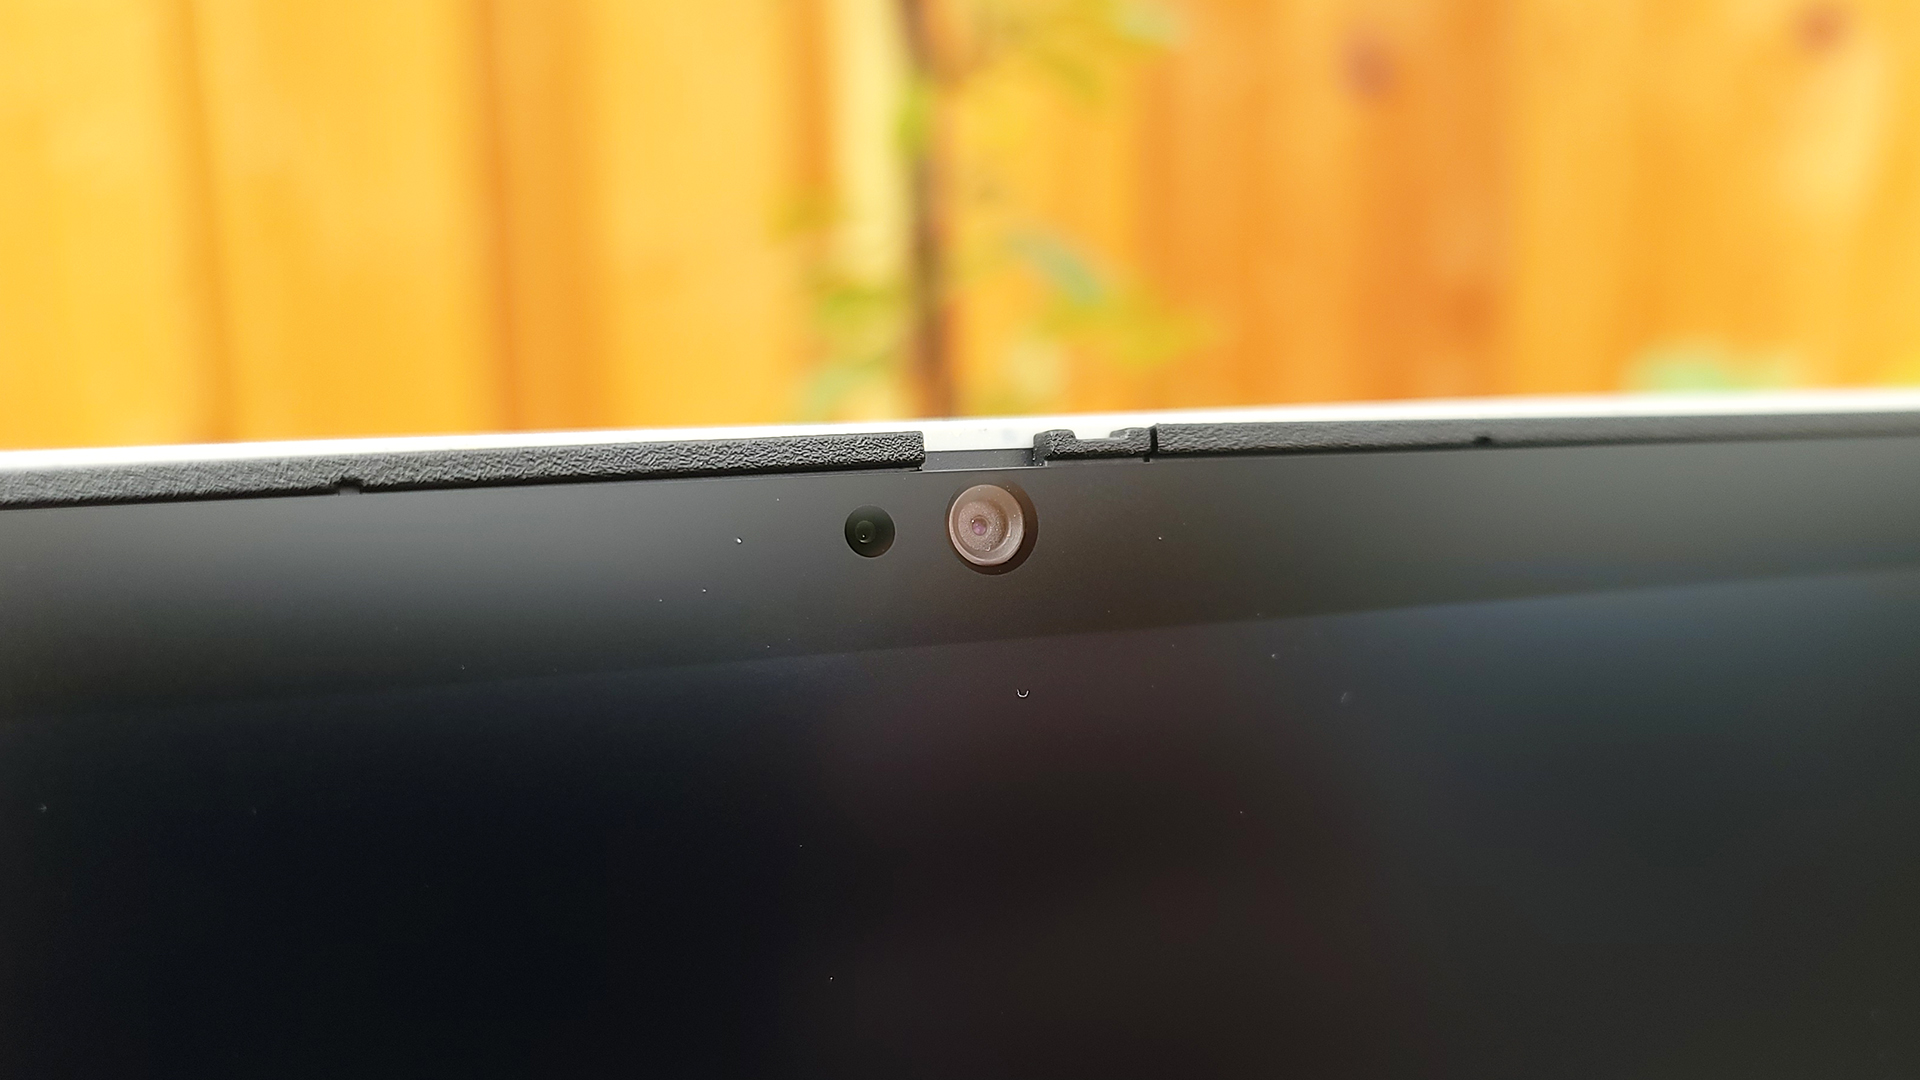 Chromebook camera not working? Here are 8 ways to fix it.